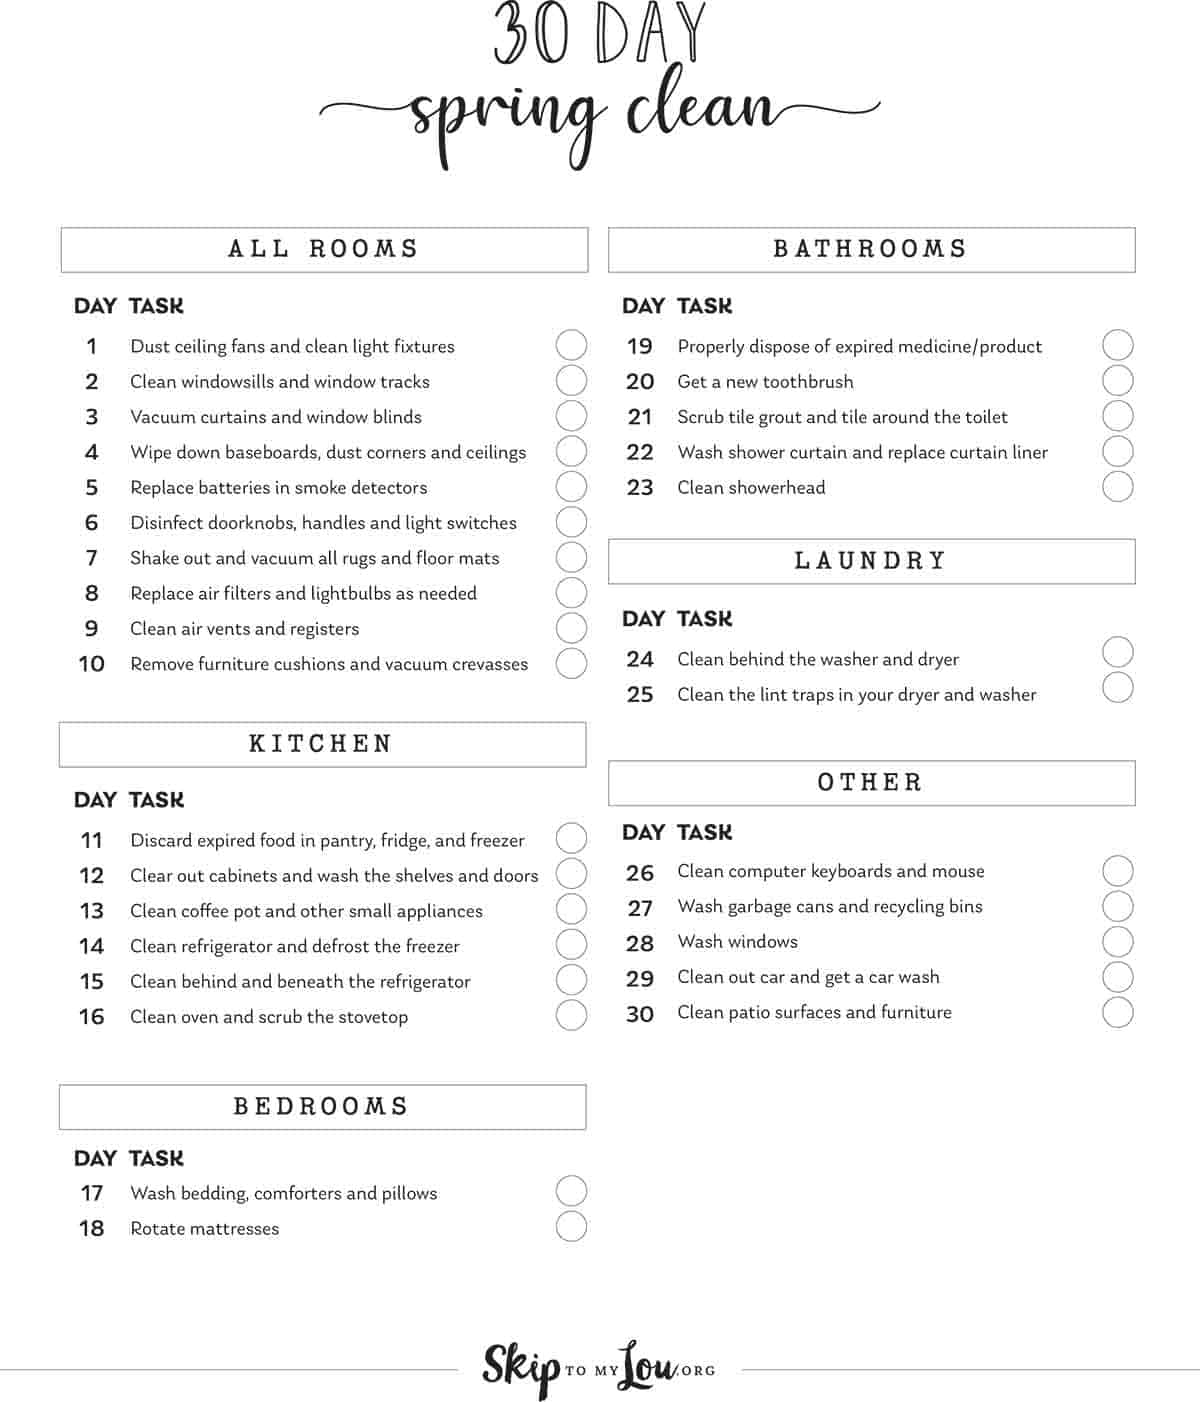 printable spring cleaning checklist